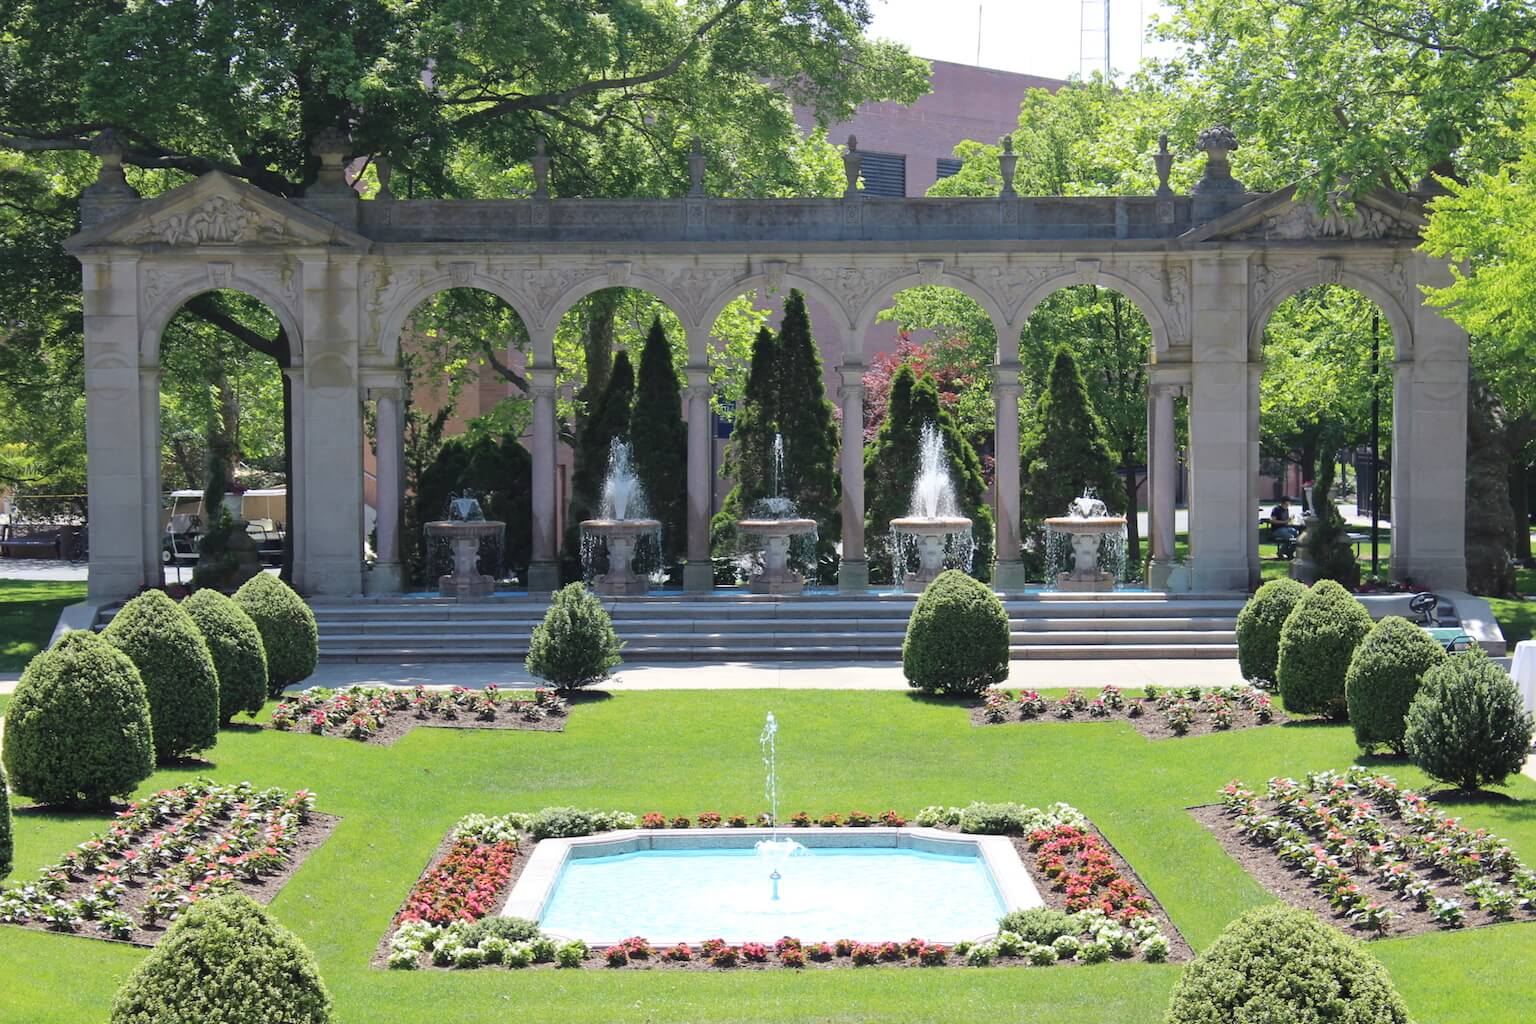 Erlanger Gardens, with fountains shooting upwards. The plants and bushes are arranged in the garden.